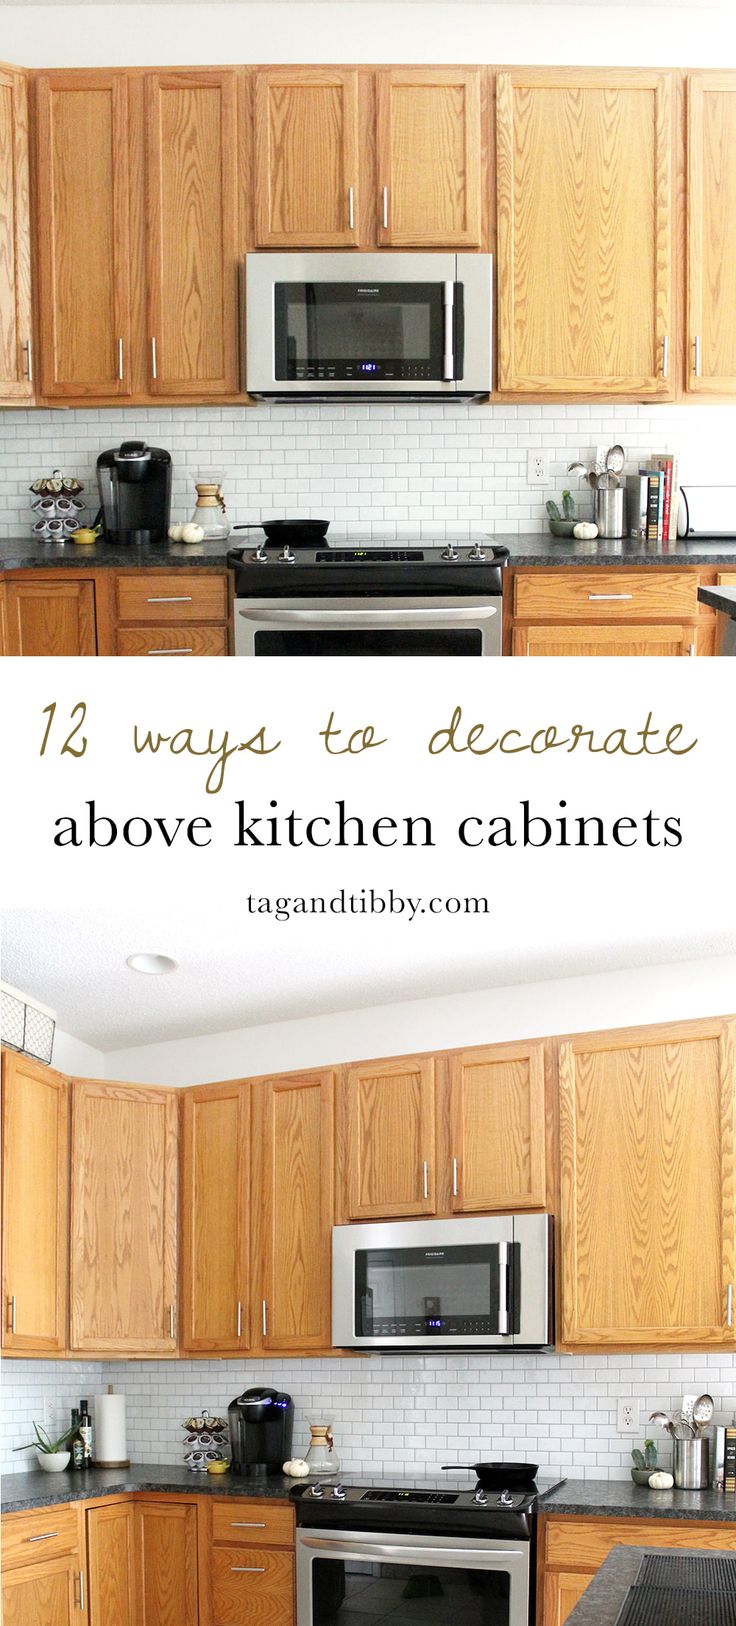 Is decorating above kitchen cabinets outdated